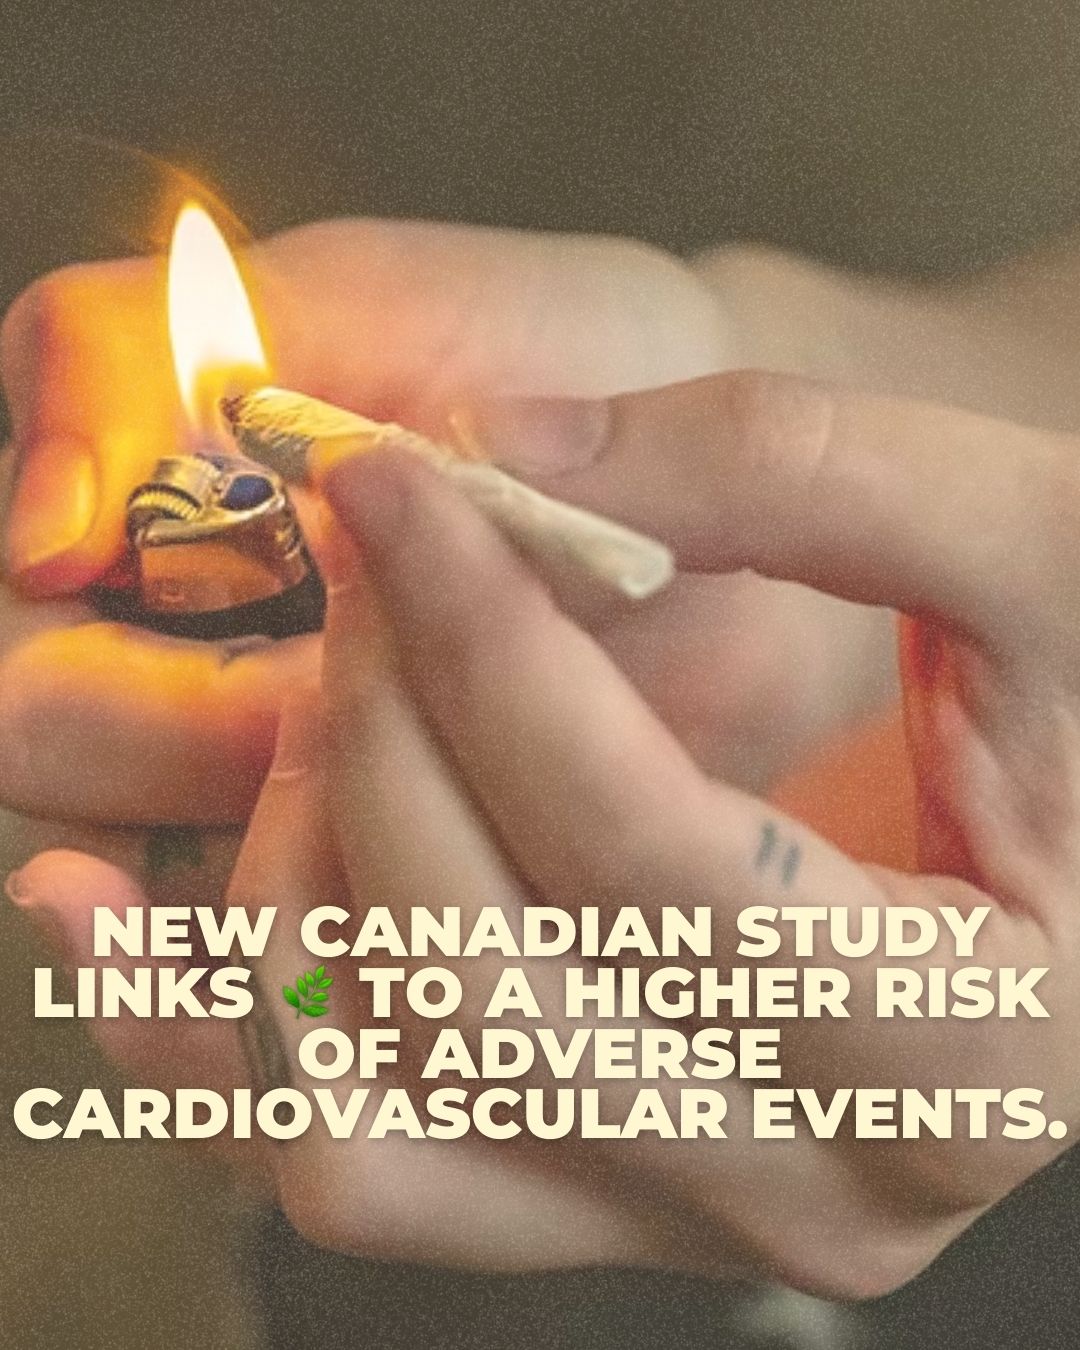 New Canadian Study Links Cannabis Disorder to a Higher Risk of Adverse Cardiovascular Events.